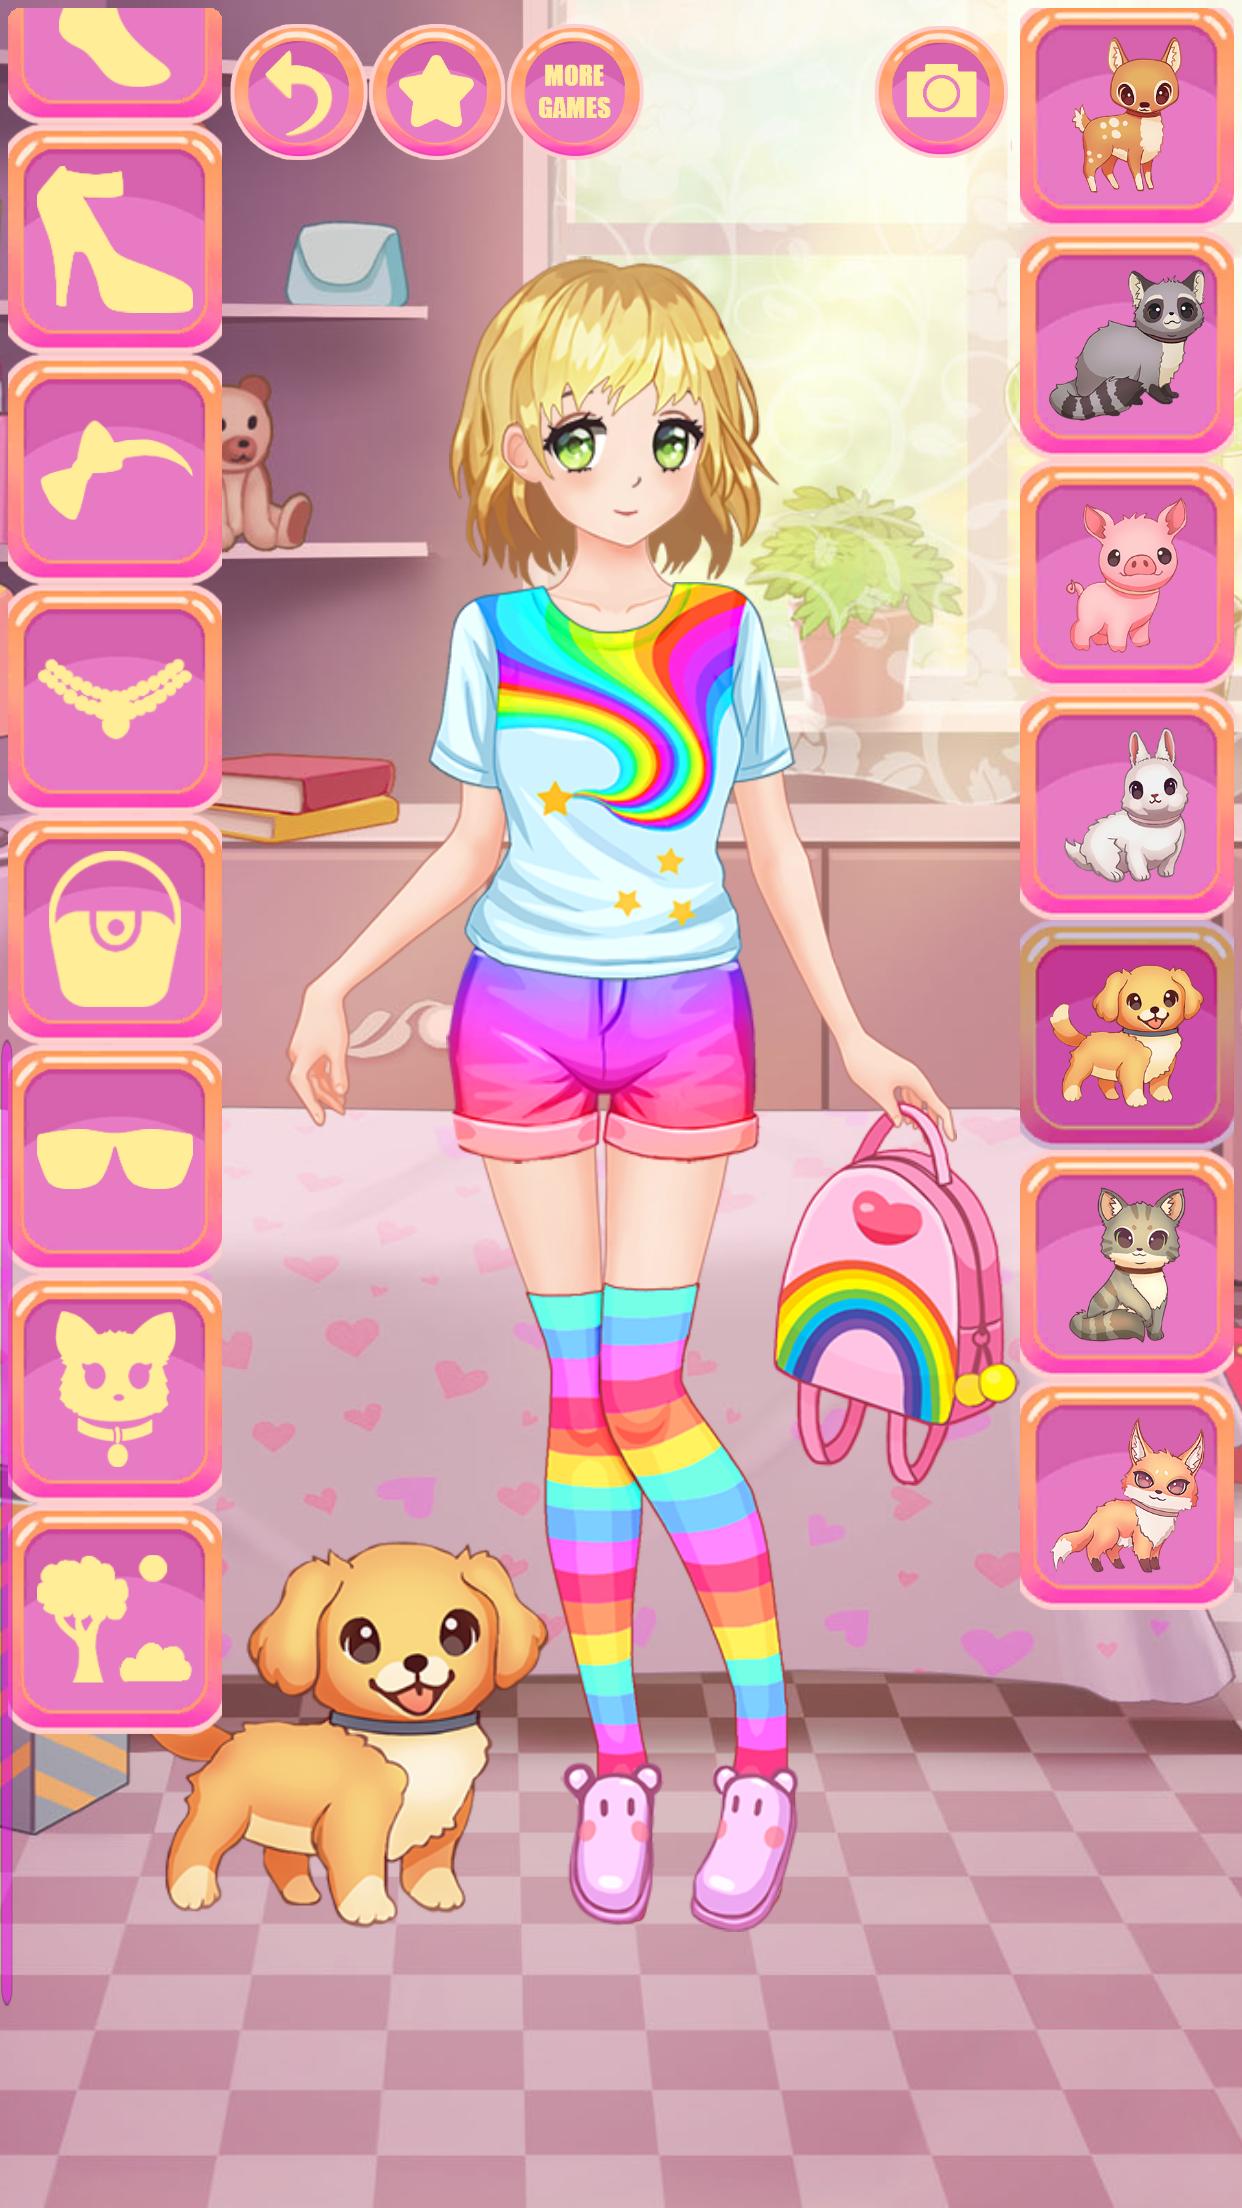 Anime y Kawaii Vestir Chicas for Android - APK Download